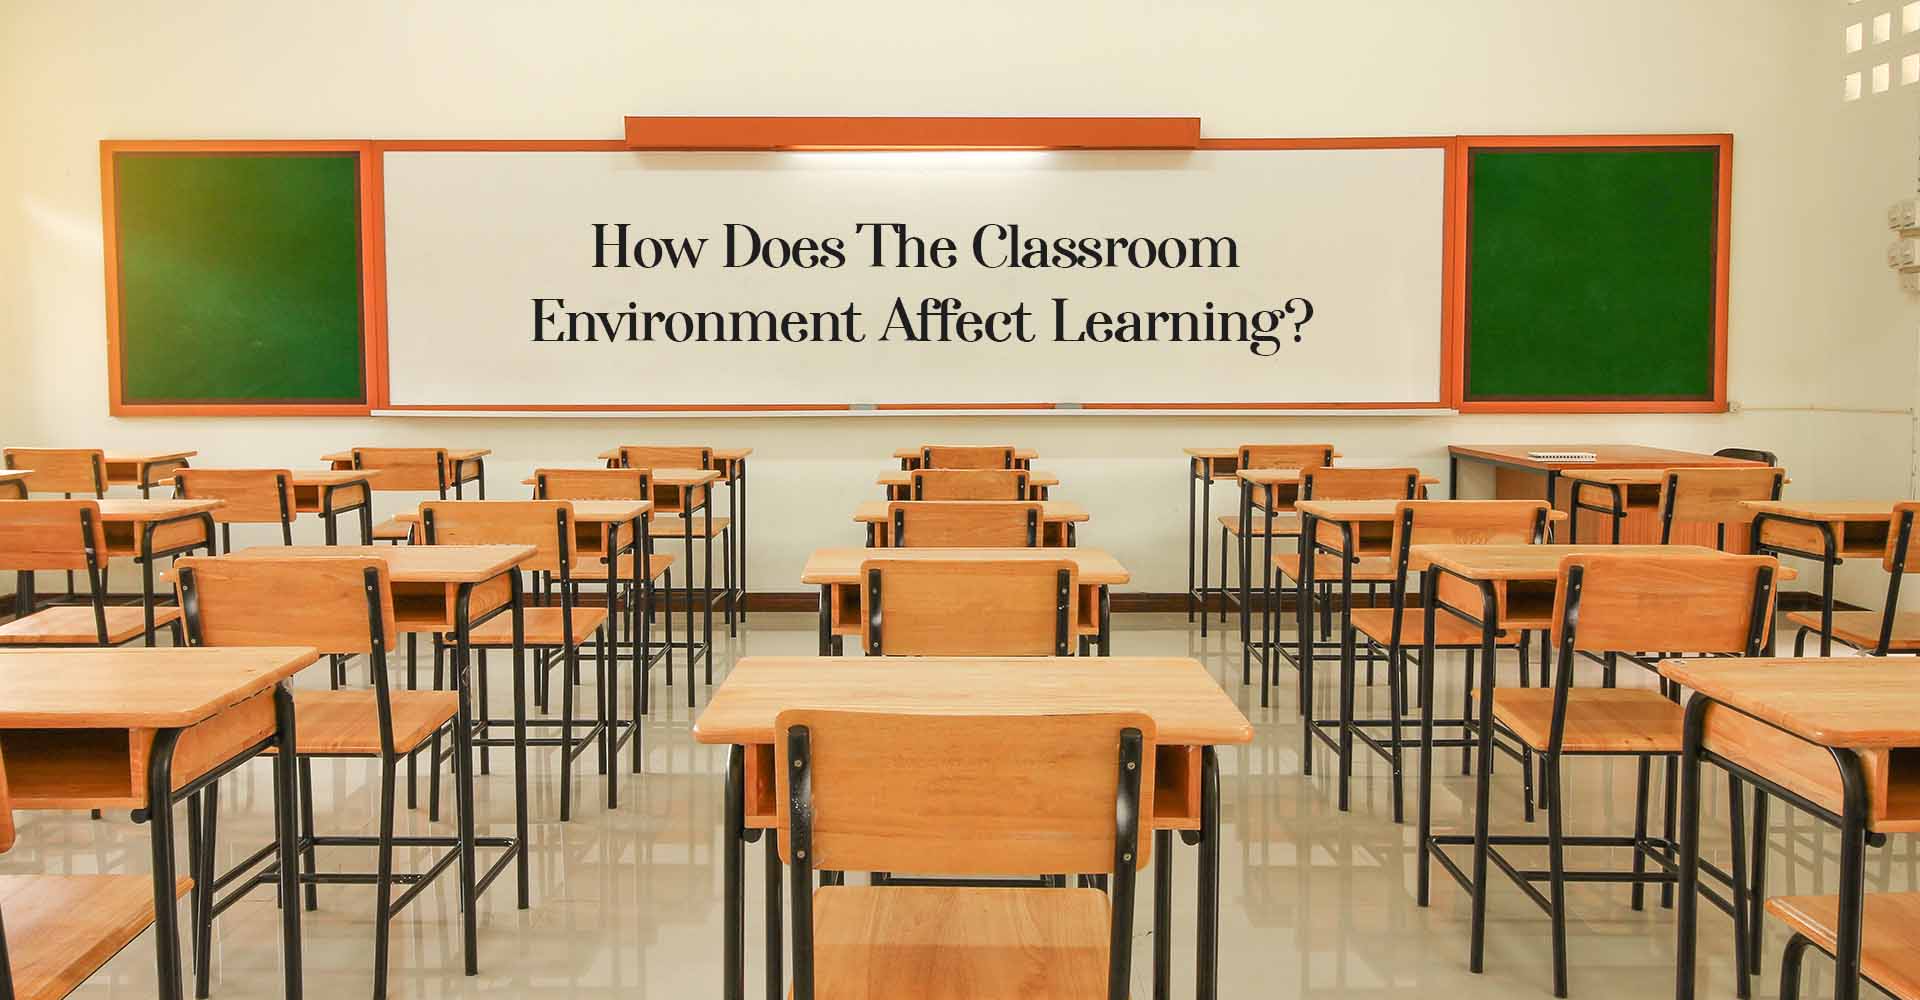 How Does The Classroom Environment Affect Learning?